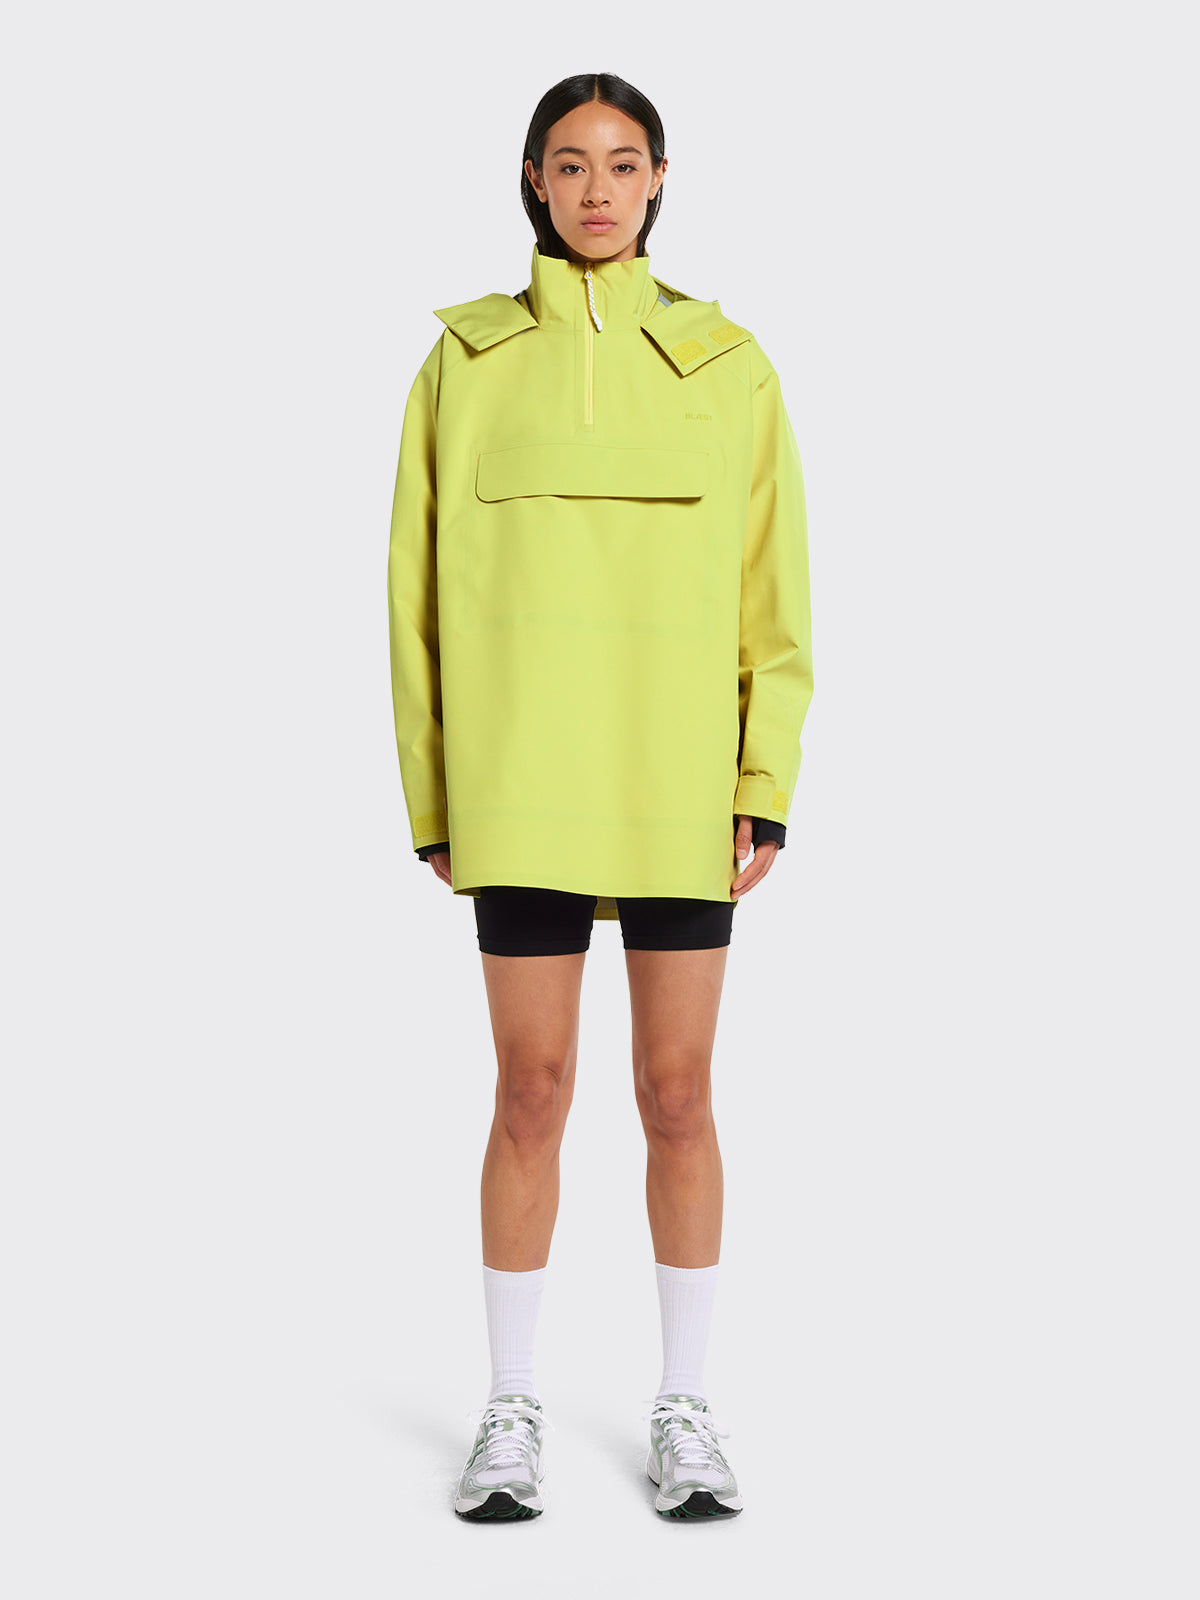 Woman in Voss poncho from Blæst in the color Muted Lime